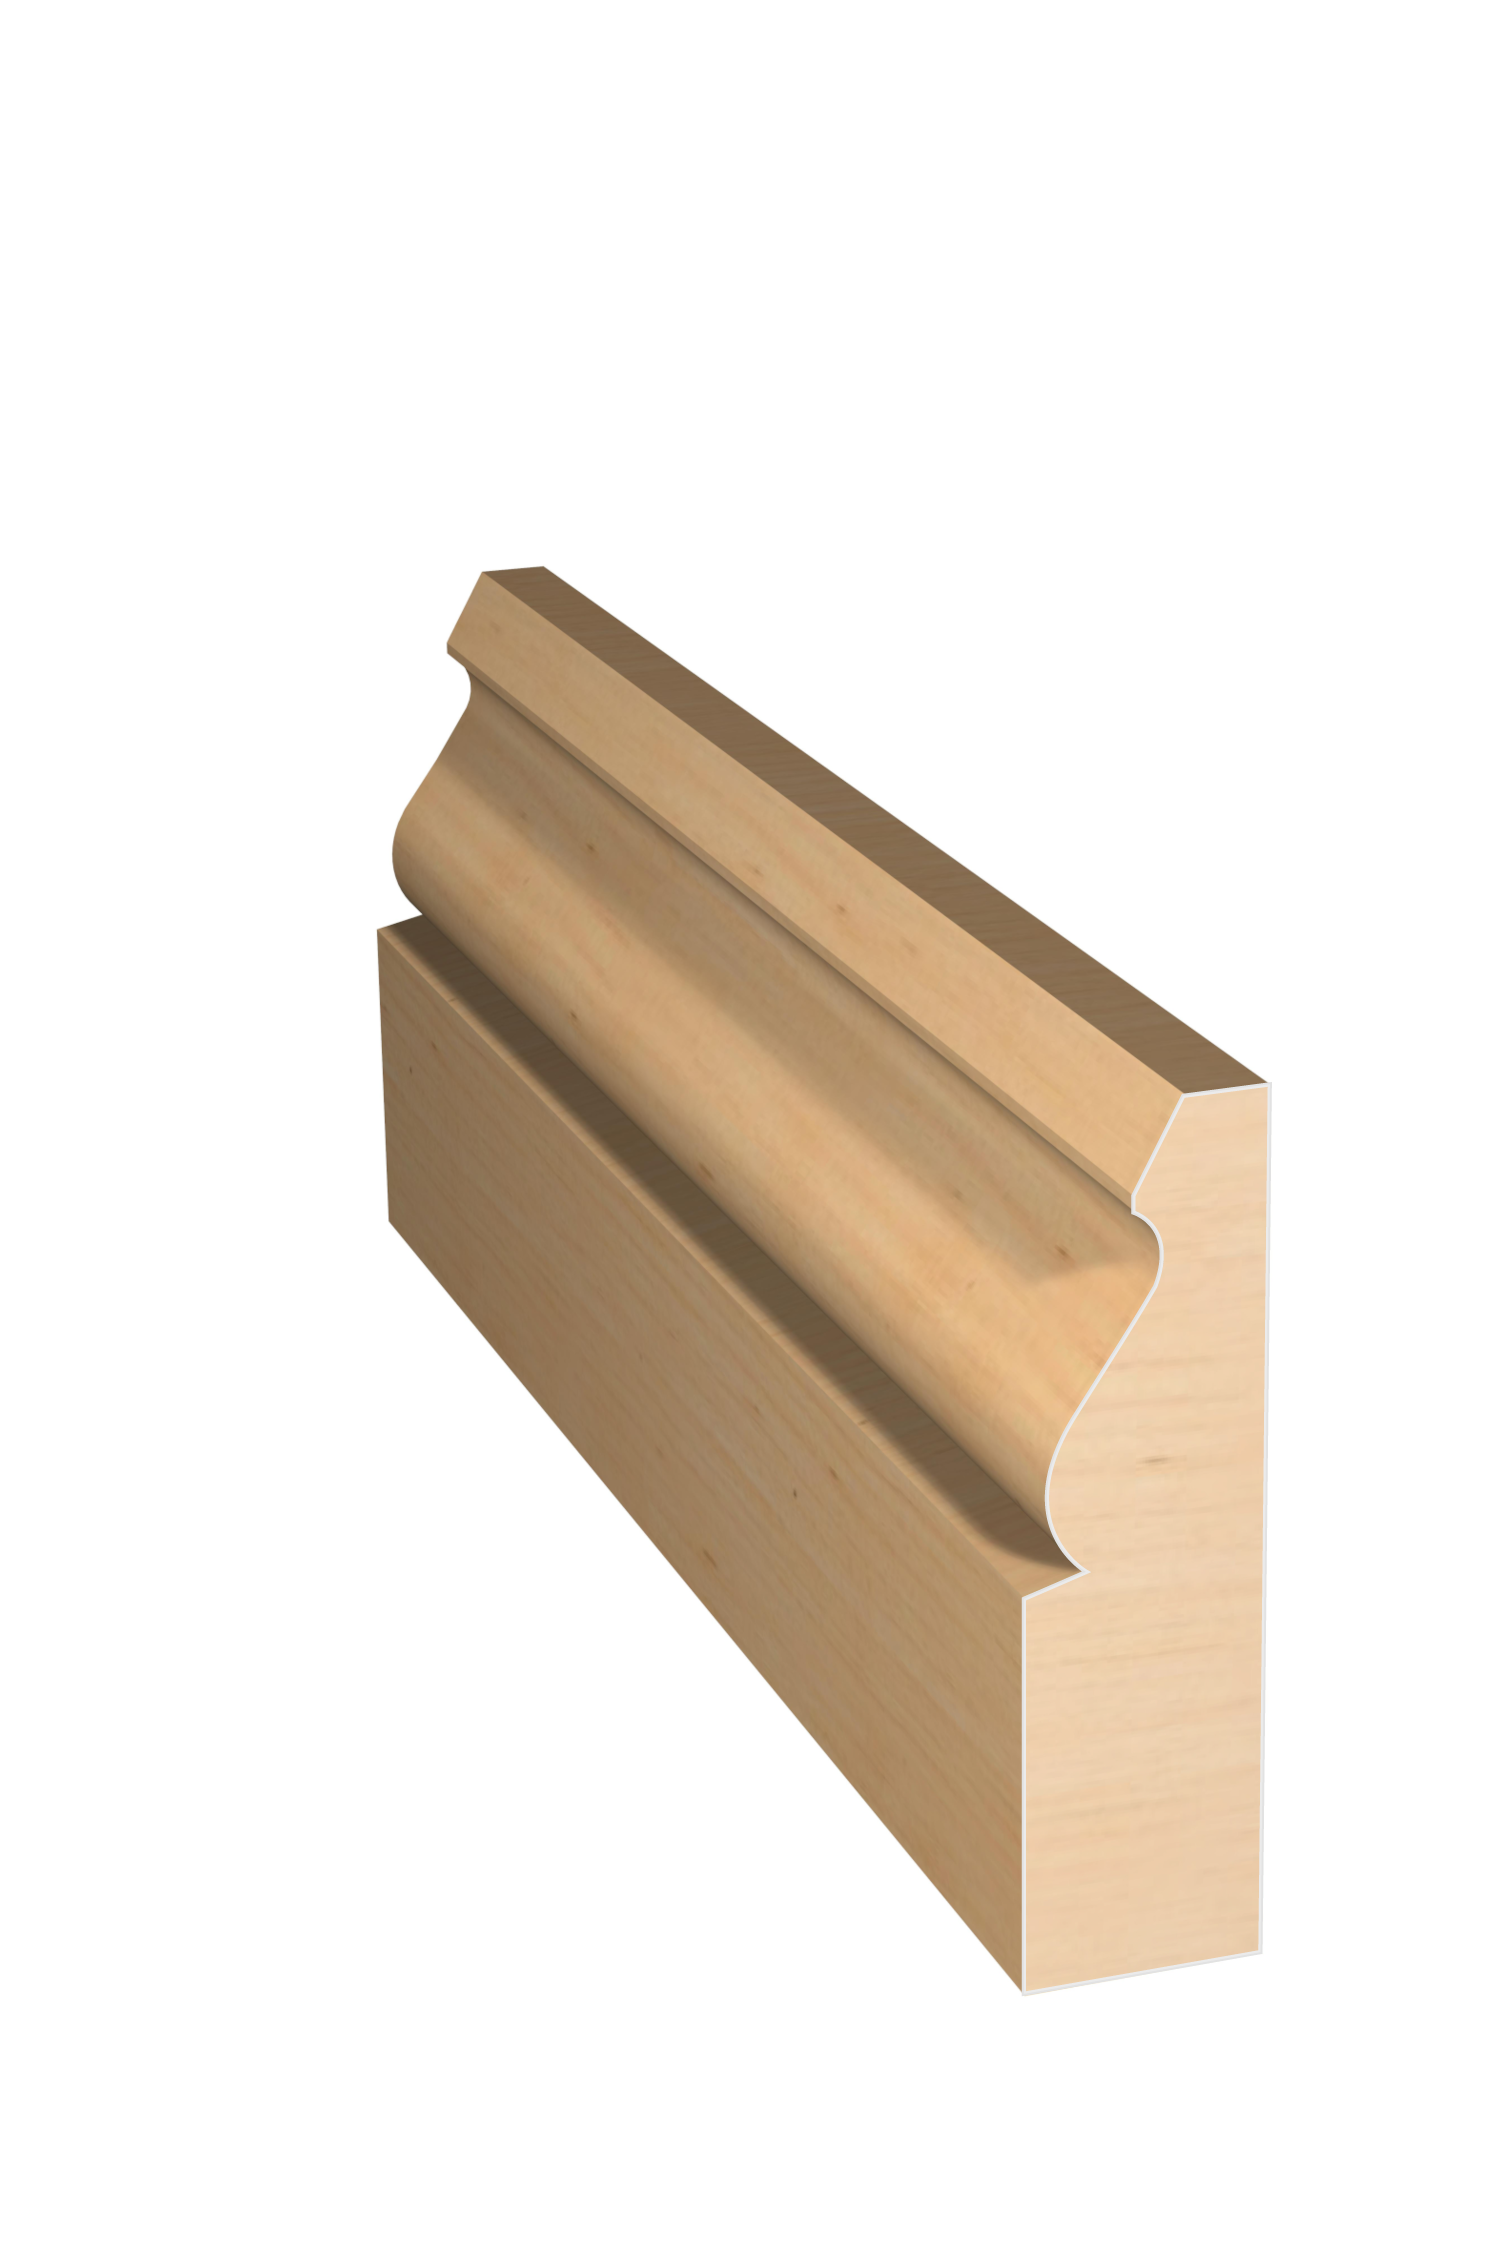 Three dimensional rendering of custom casing wood molding CAPL21433 made by Public Lumber Company in Detroit.